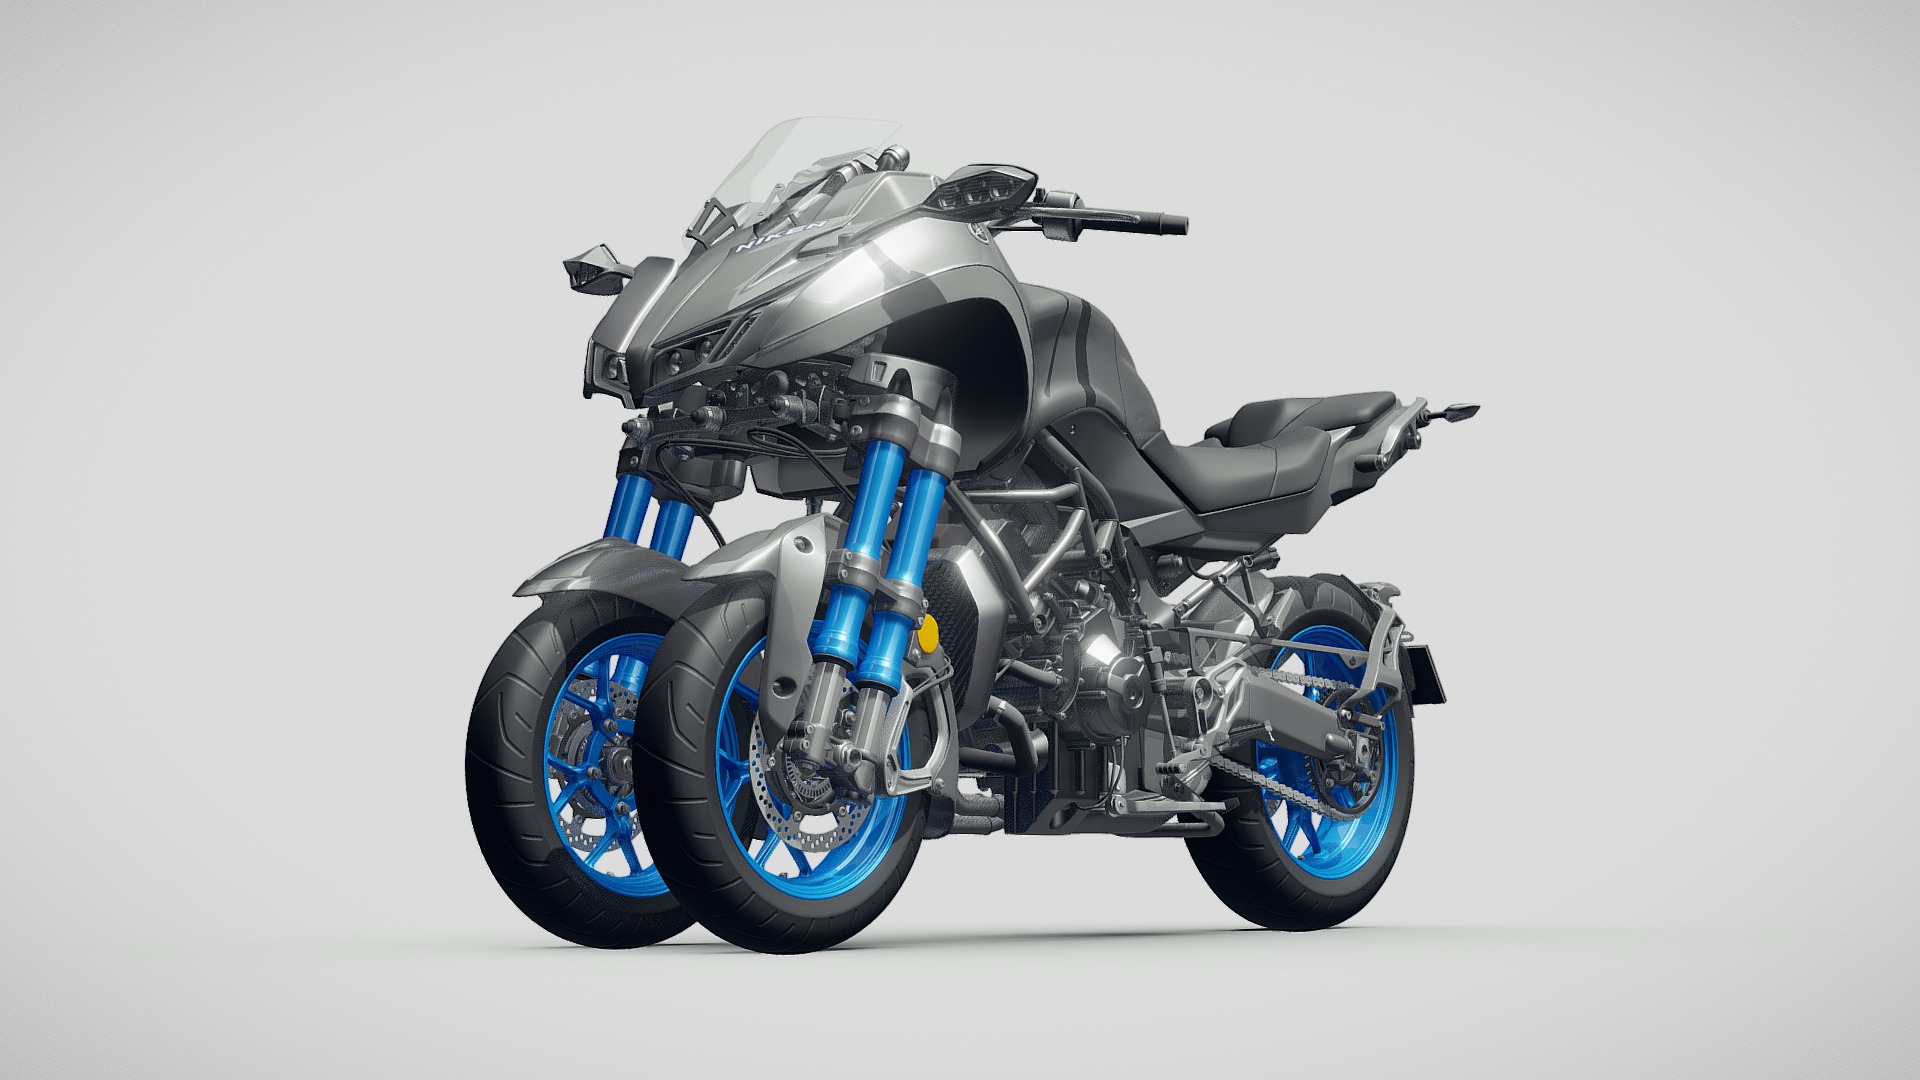 3D model Yamaha Niken 2019 - This is a 3D model of the Yamaha Niken 2019. The 3D model is about a motorcycle with blue and black tires.